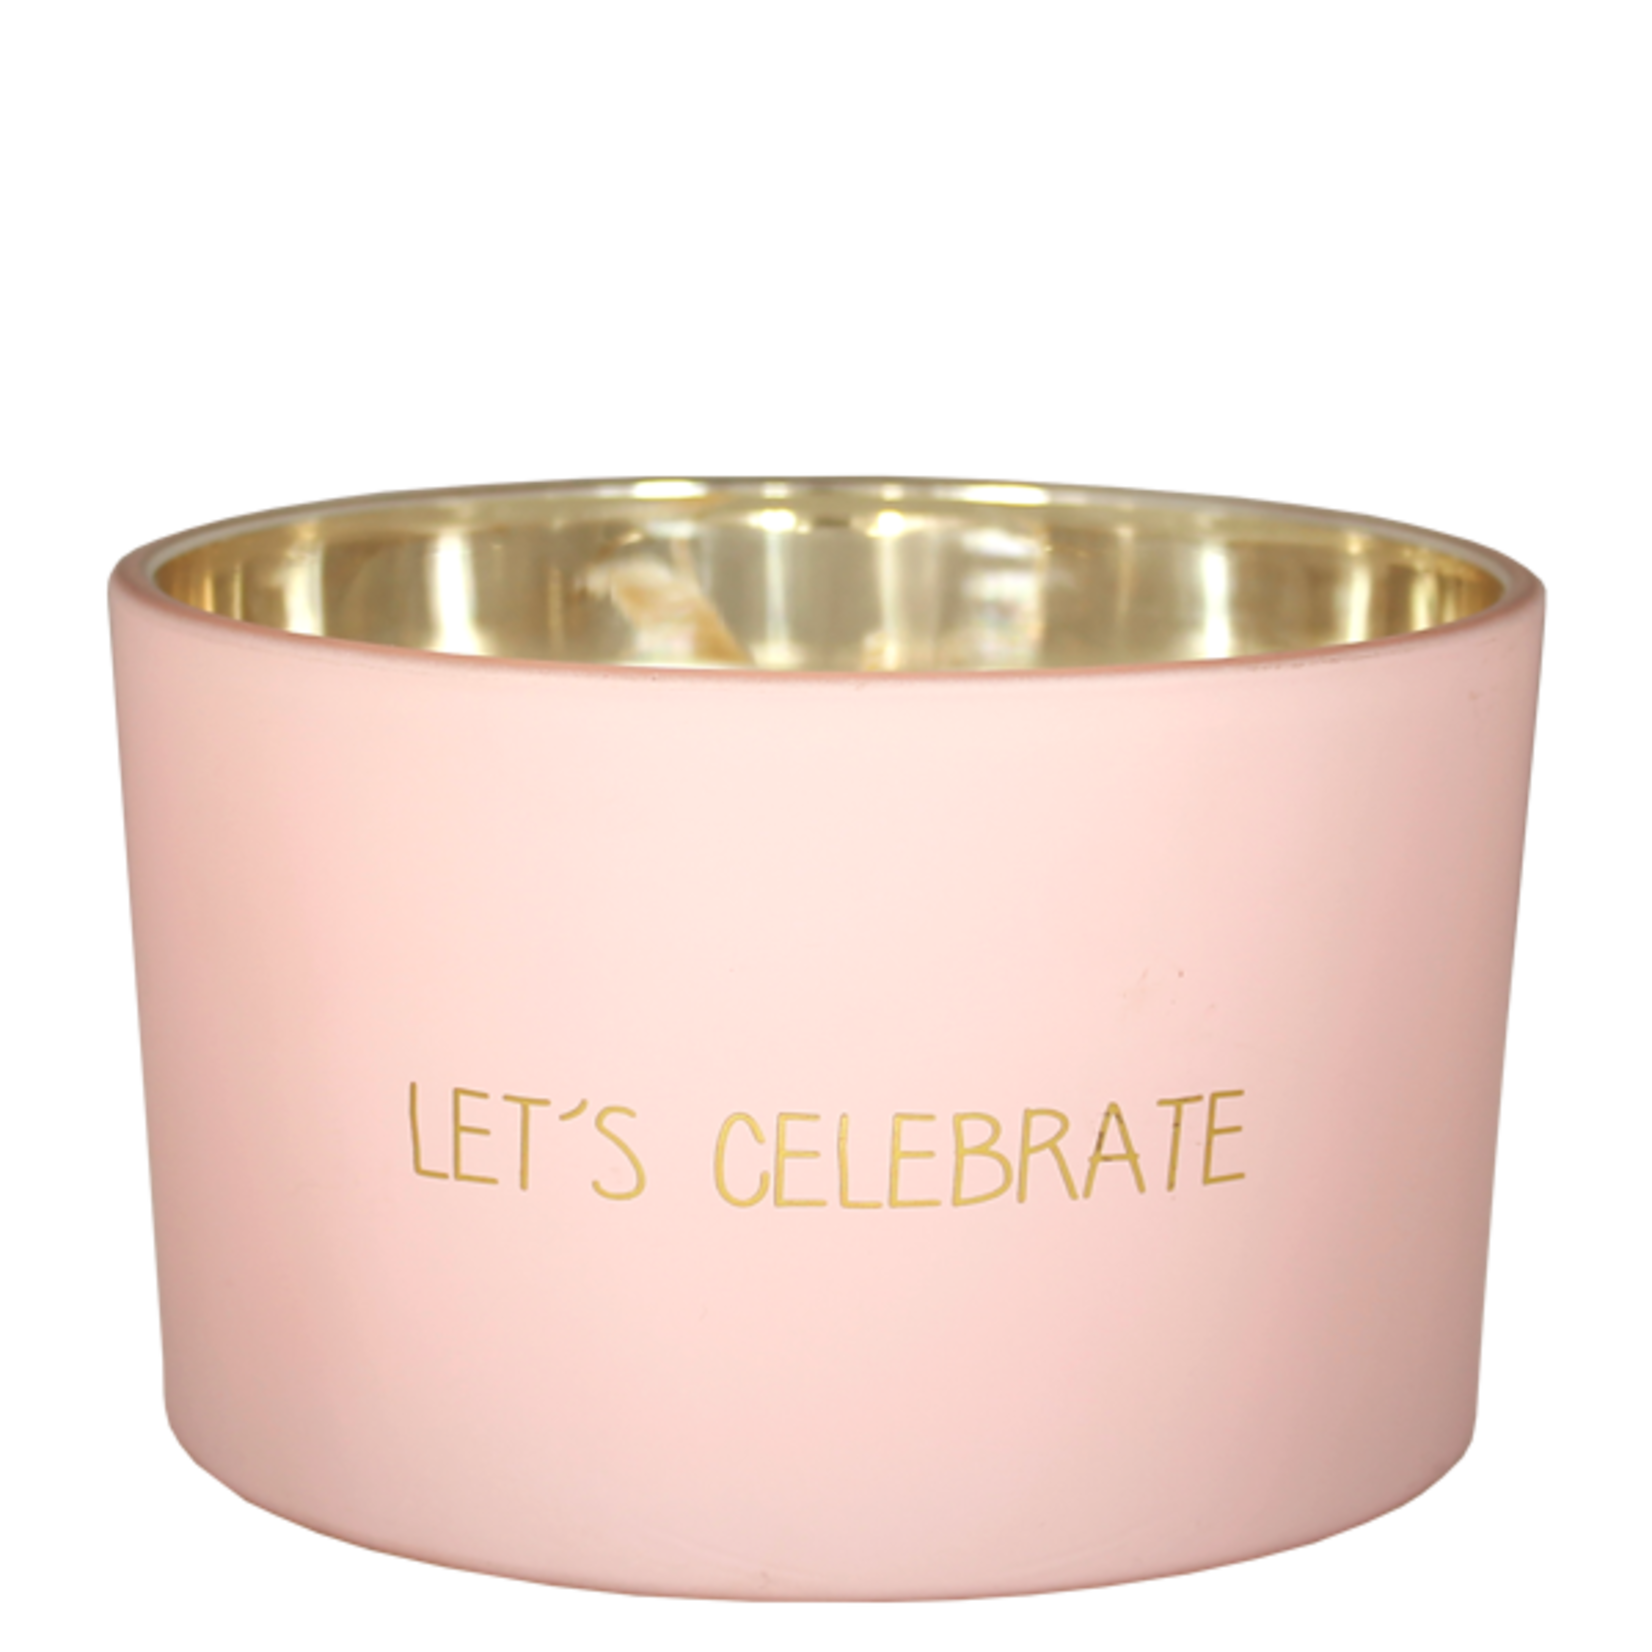 My Flame Sojakaars mat - Let's celebrate - Roze